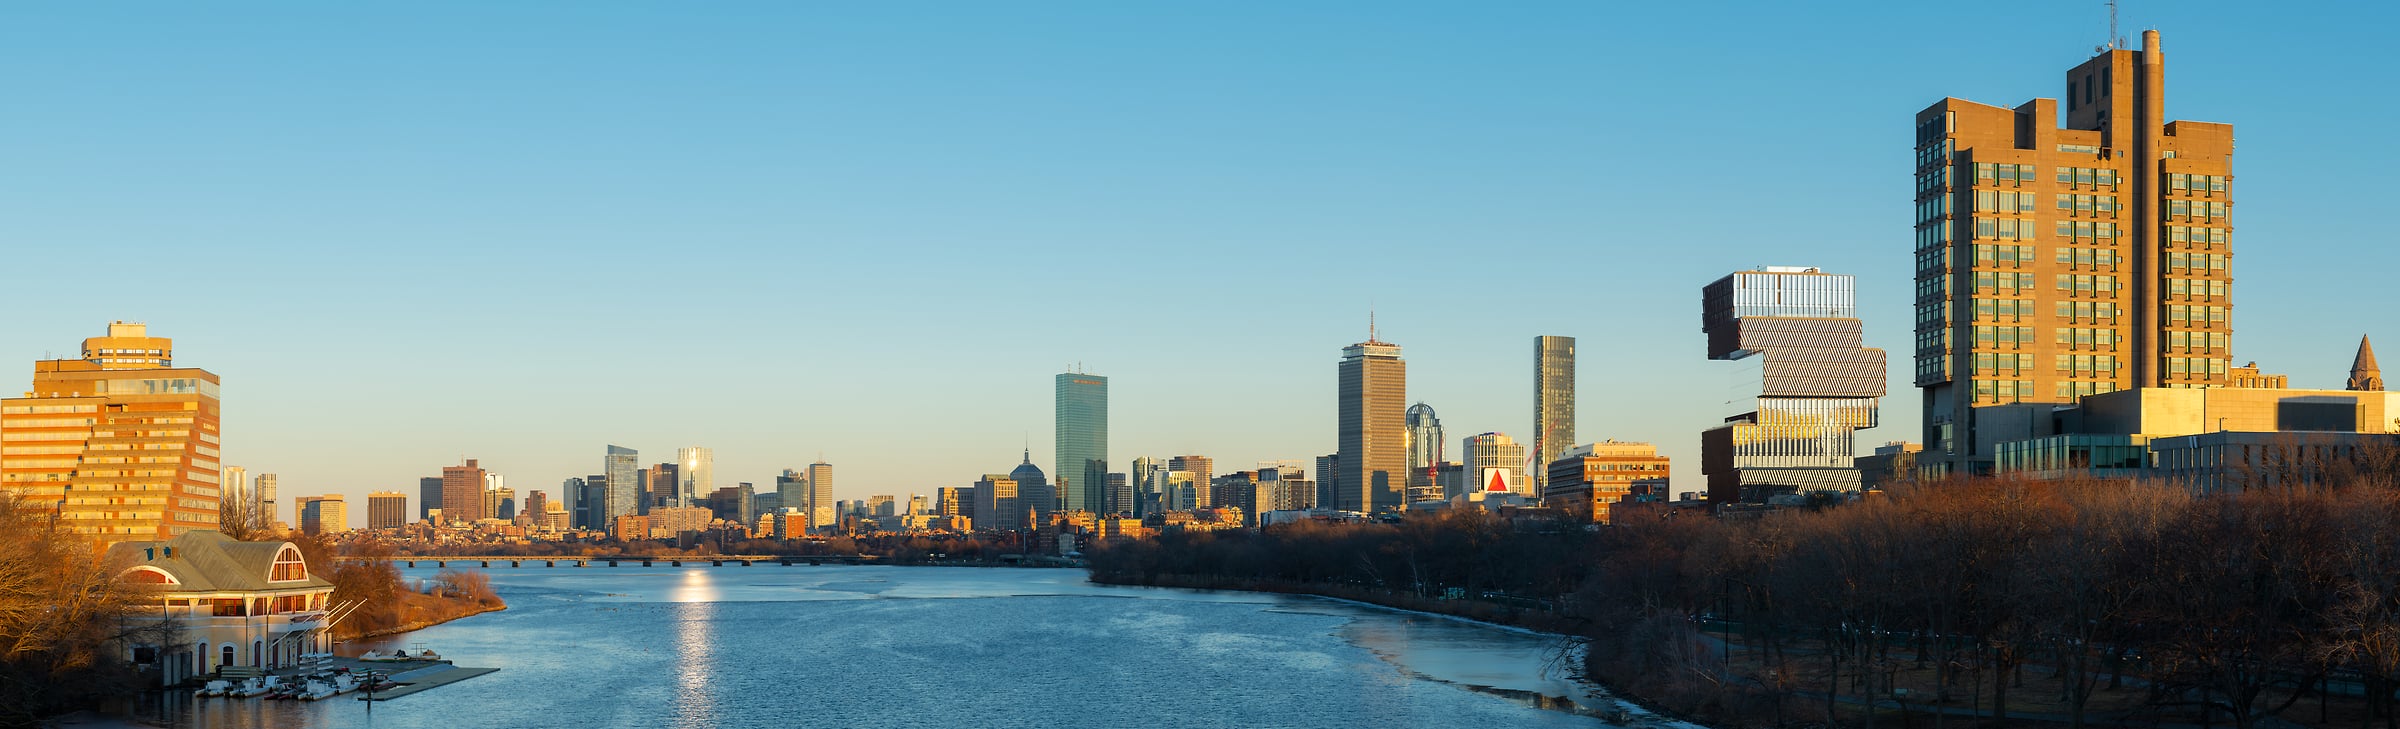 349 megapixels! A very high resolution, large-format VAST photo print of the Charles River in Boston with the city skyline and a blue sky; photograph created by Greg Probst in Boston, Massachusetts.